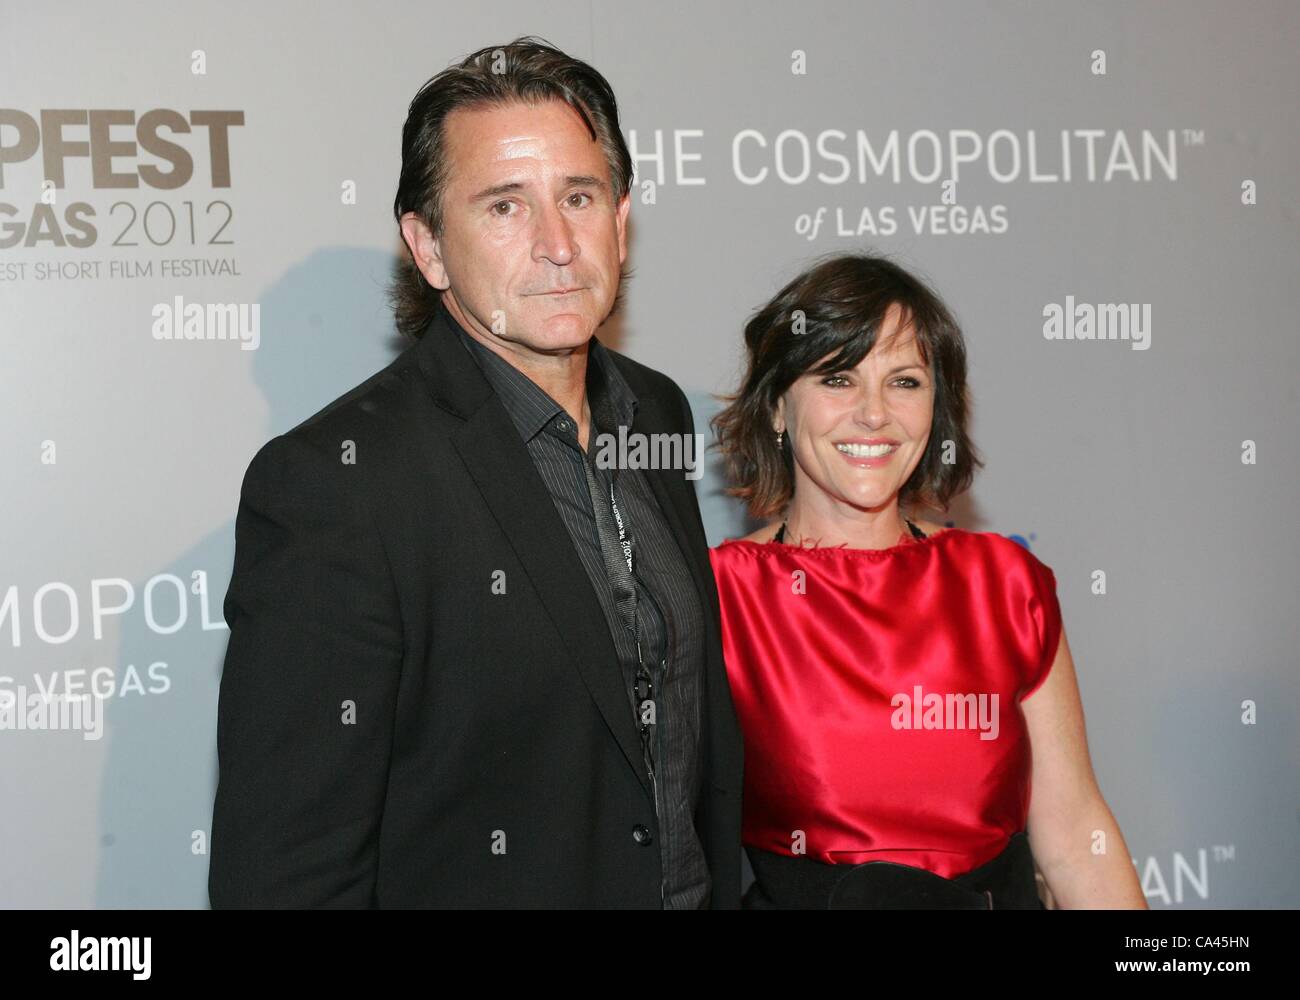 Anthony LaPaglia, Gia Carides in attendance for Tropfest Las Vegas All-Star Competition, The Cosmopolitan of Las Vegas, Las Vegas, NV June 3, 2012. Photo By: James Atoa/Everett Collection Stock Photo